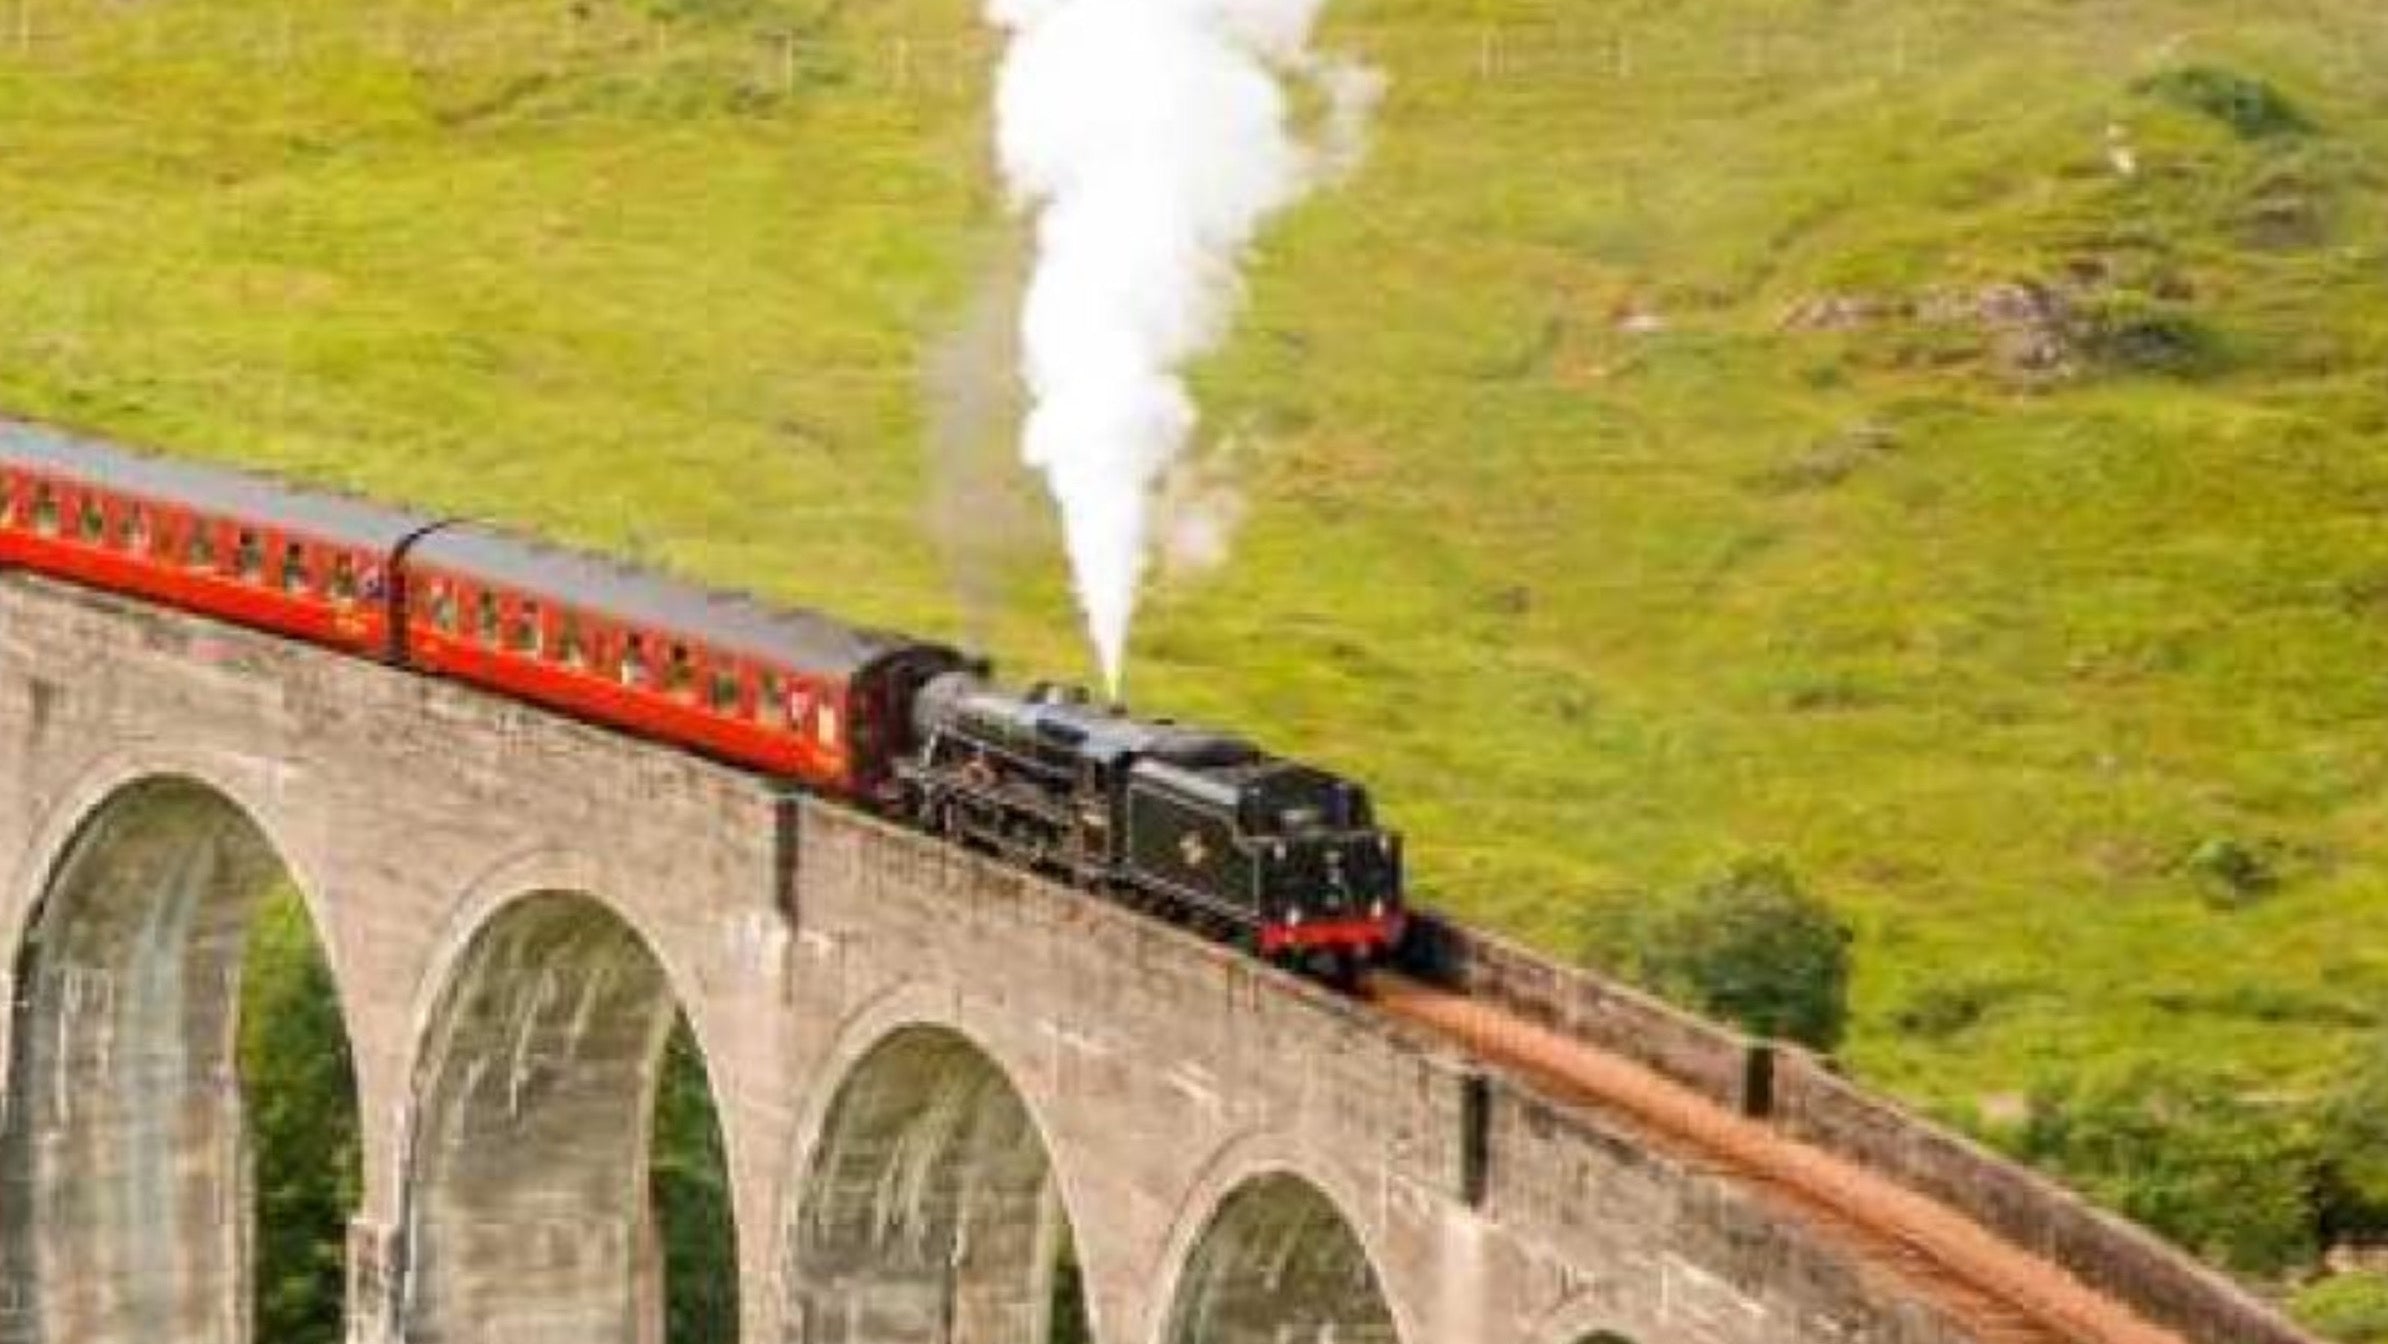 Bad news for fans: the &#8220;Hogwarts Express&#8221;, the iconic train in the Harry Potter saga, is no longer running., Magnate Daily